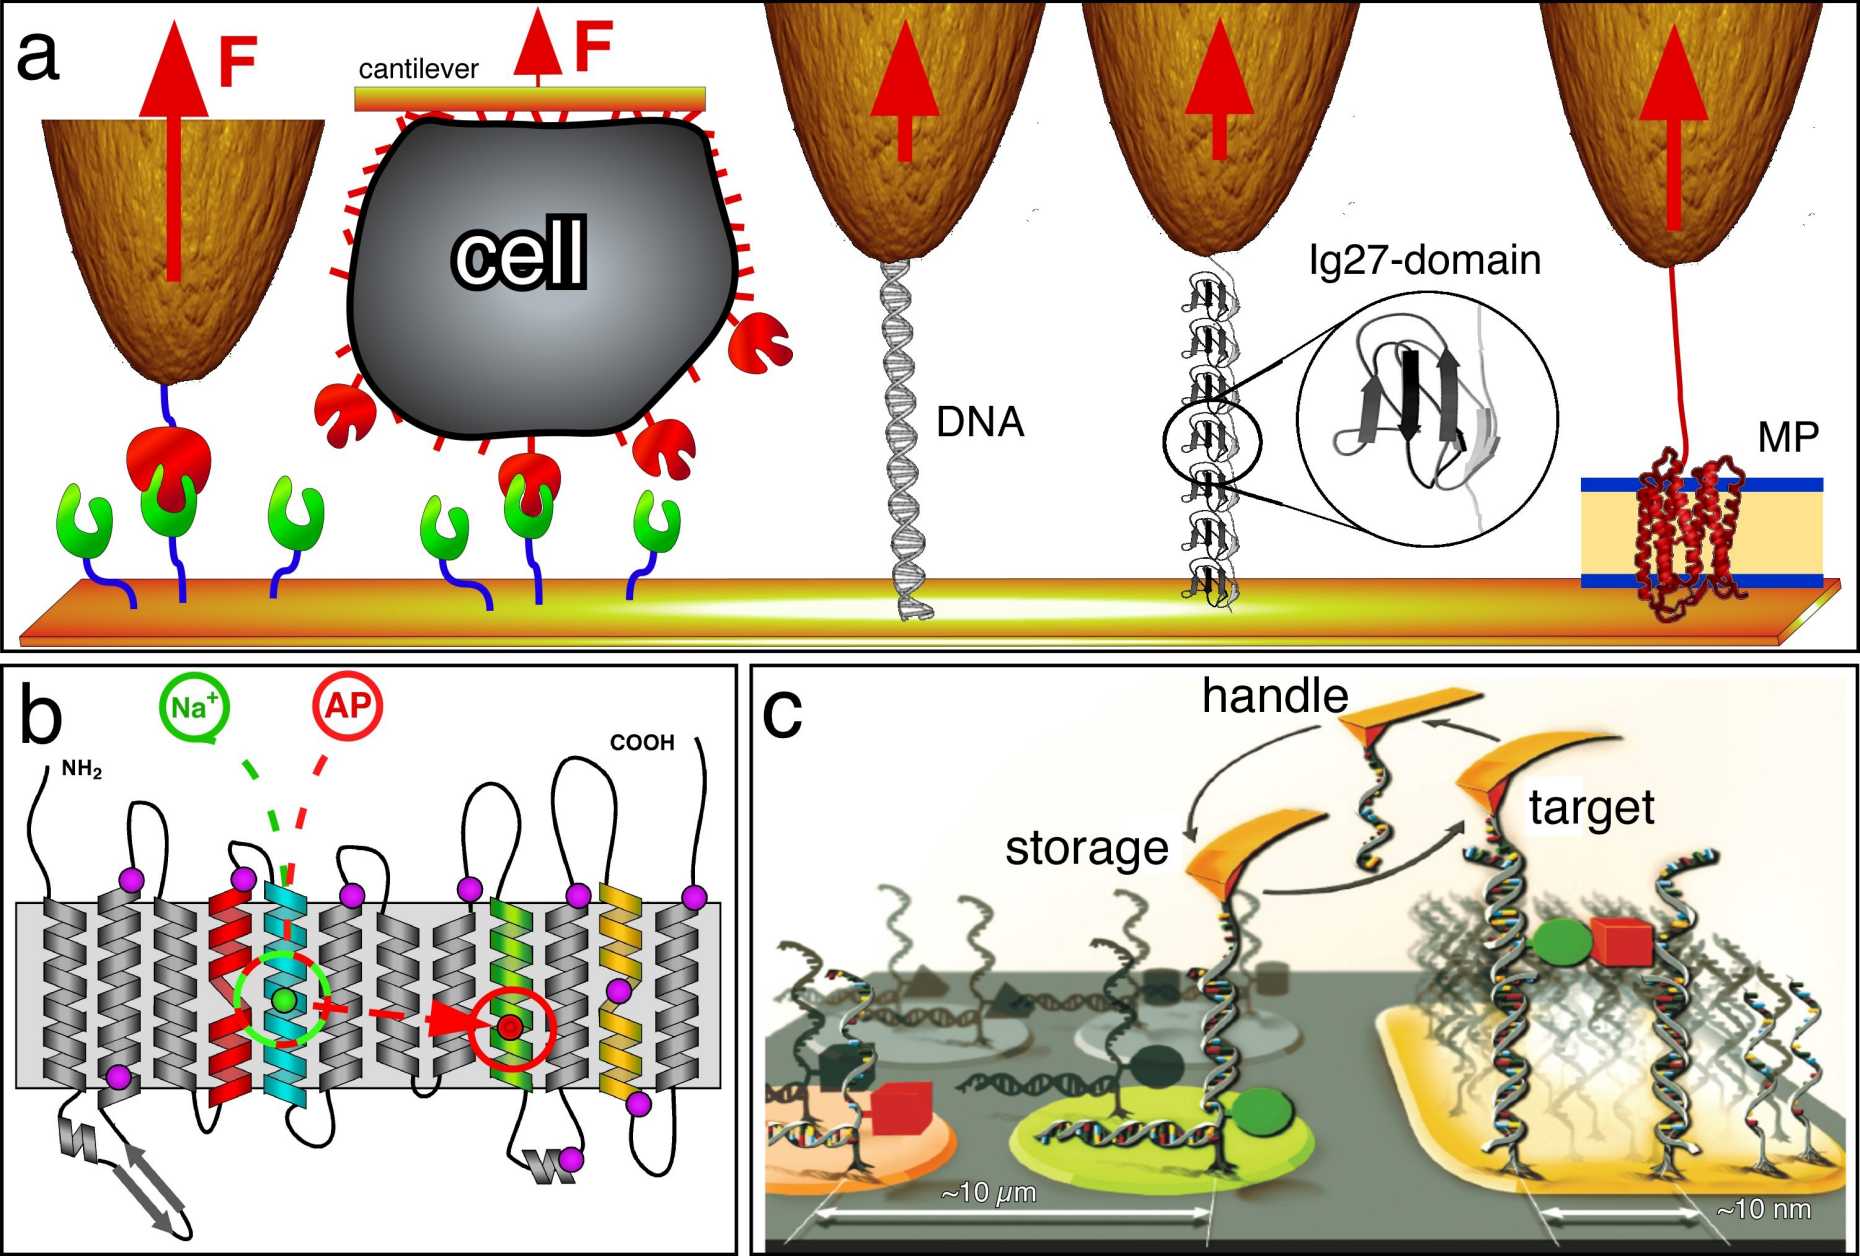 Single-molecule force spectroscopy (SMFS) for the manipulation, control and design of biological systems. (a) Measuring interaction forces F of single biomolecules by AFM. The examples shown probe ligand–receptor interactions in their isolated form (left) and embedded in the cellular environment (the AFM tip has been replaced by a biological cell); stretching of DNA; unfolding of Ig27-titin tandem constructs; and unfolding of a transmembrane protein (MP) embedded in the lipid or cellular membrane. (b) SMFS can detect and locate interactions (circles) on the teritiary structure of membrane proteins (here proton/sodium antiporter NhaA from E. coli). A ligand (sodium ion) or inhibitor (2-aminoperimidine, AP) binding to the ligand-binding site (large green circle) establishes different interactions activating (large green circle) or deactivating (large green and red circles) the antiporter. c, Single molecule cut and paste assay developed by the Group of Herman Gaub (LMU Munich) to mechanically pick up single molecules from discrete storage sites with a DNA oligomer functionalized to the AFM probe and depositing the molecules at a target site with nanoscopic precision. Figure adapted from Muller & Dufrene, Nature Nanotechnology (2008) 3, 261-269.